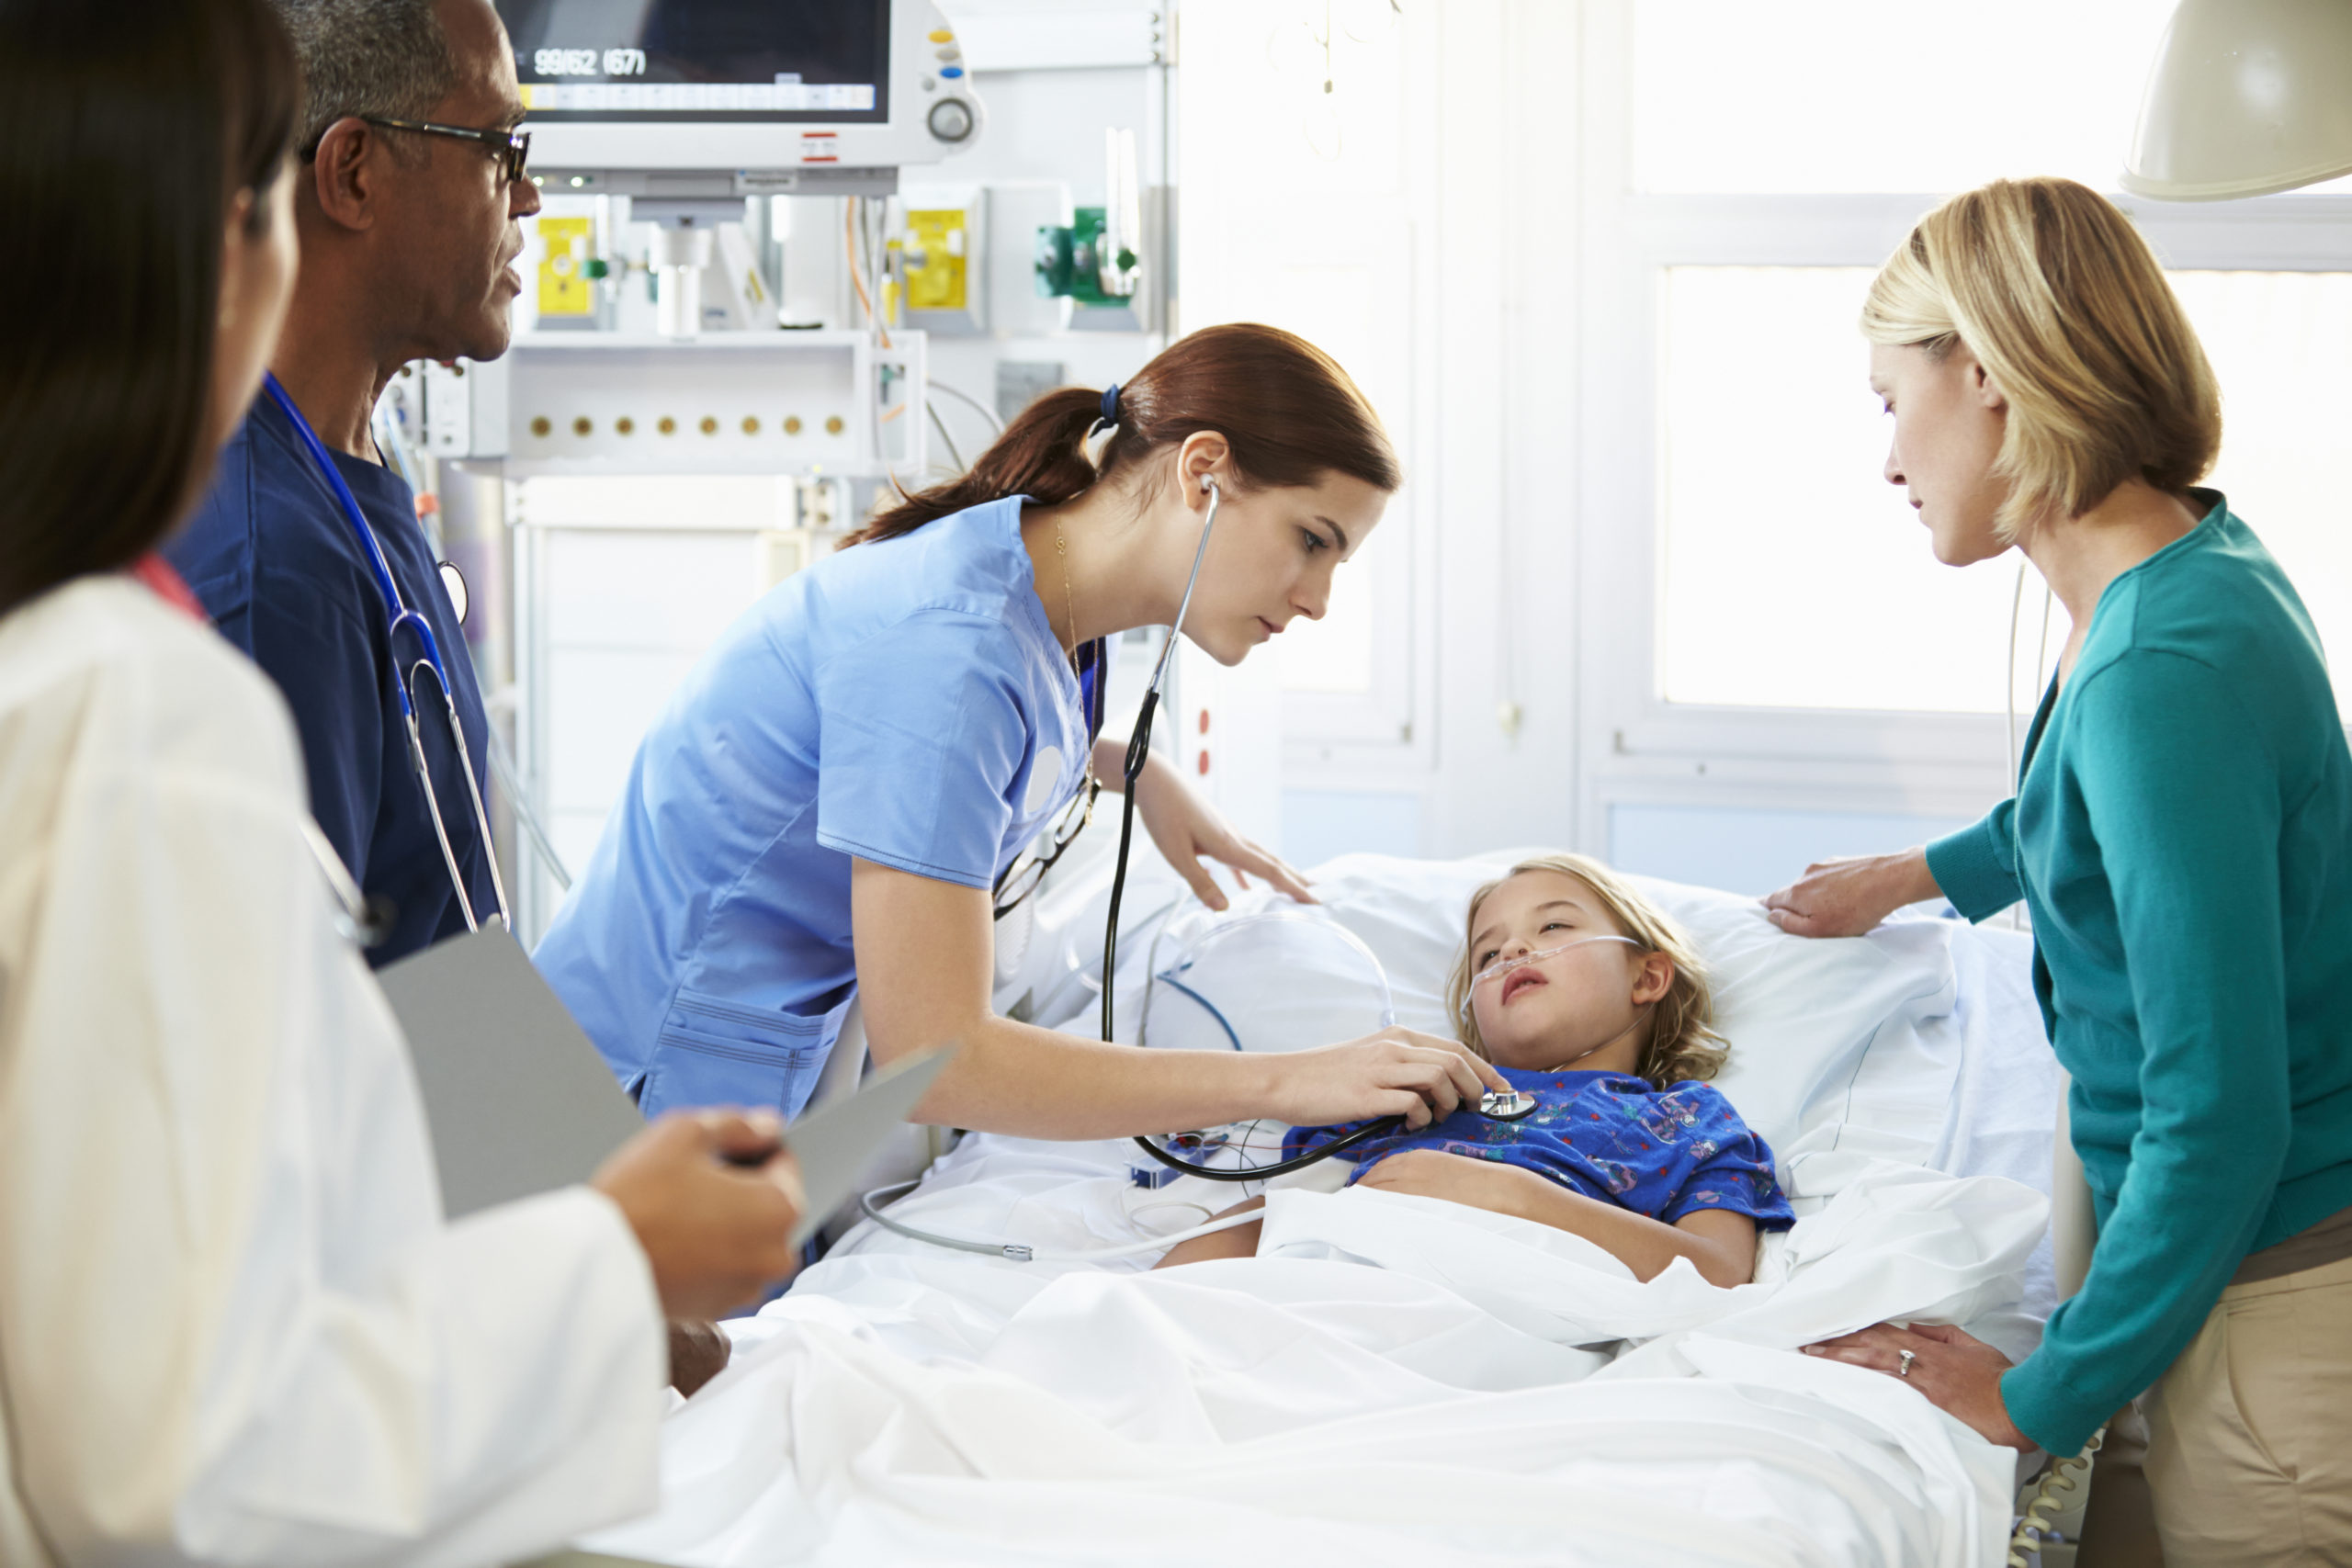 Sick child in ICU with parent and doctors standing nearby